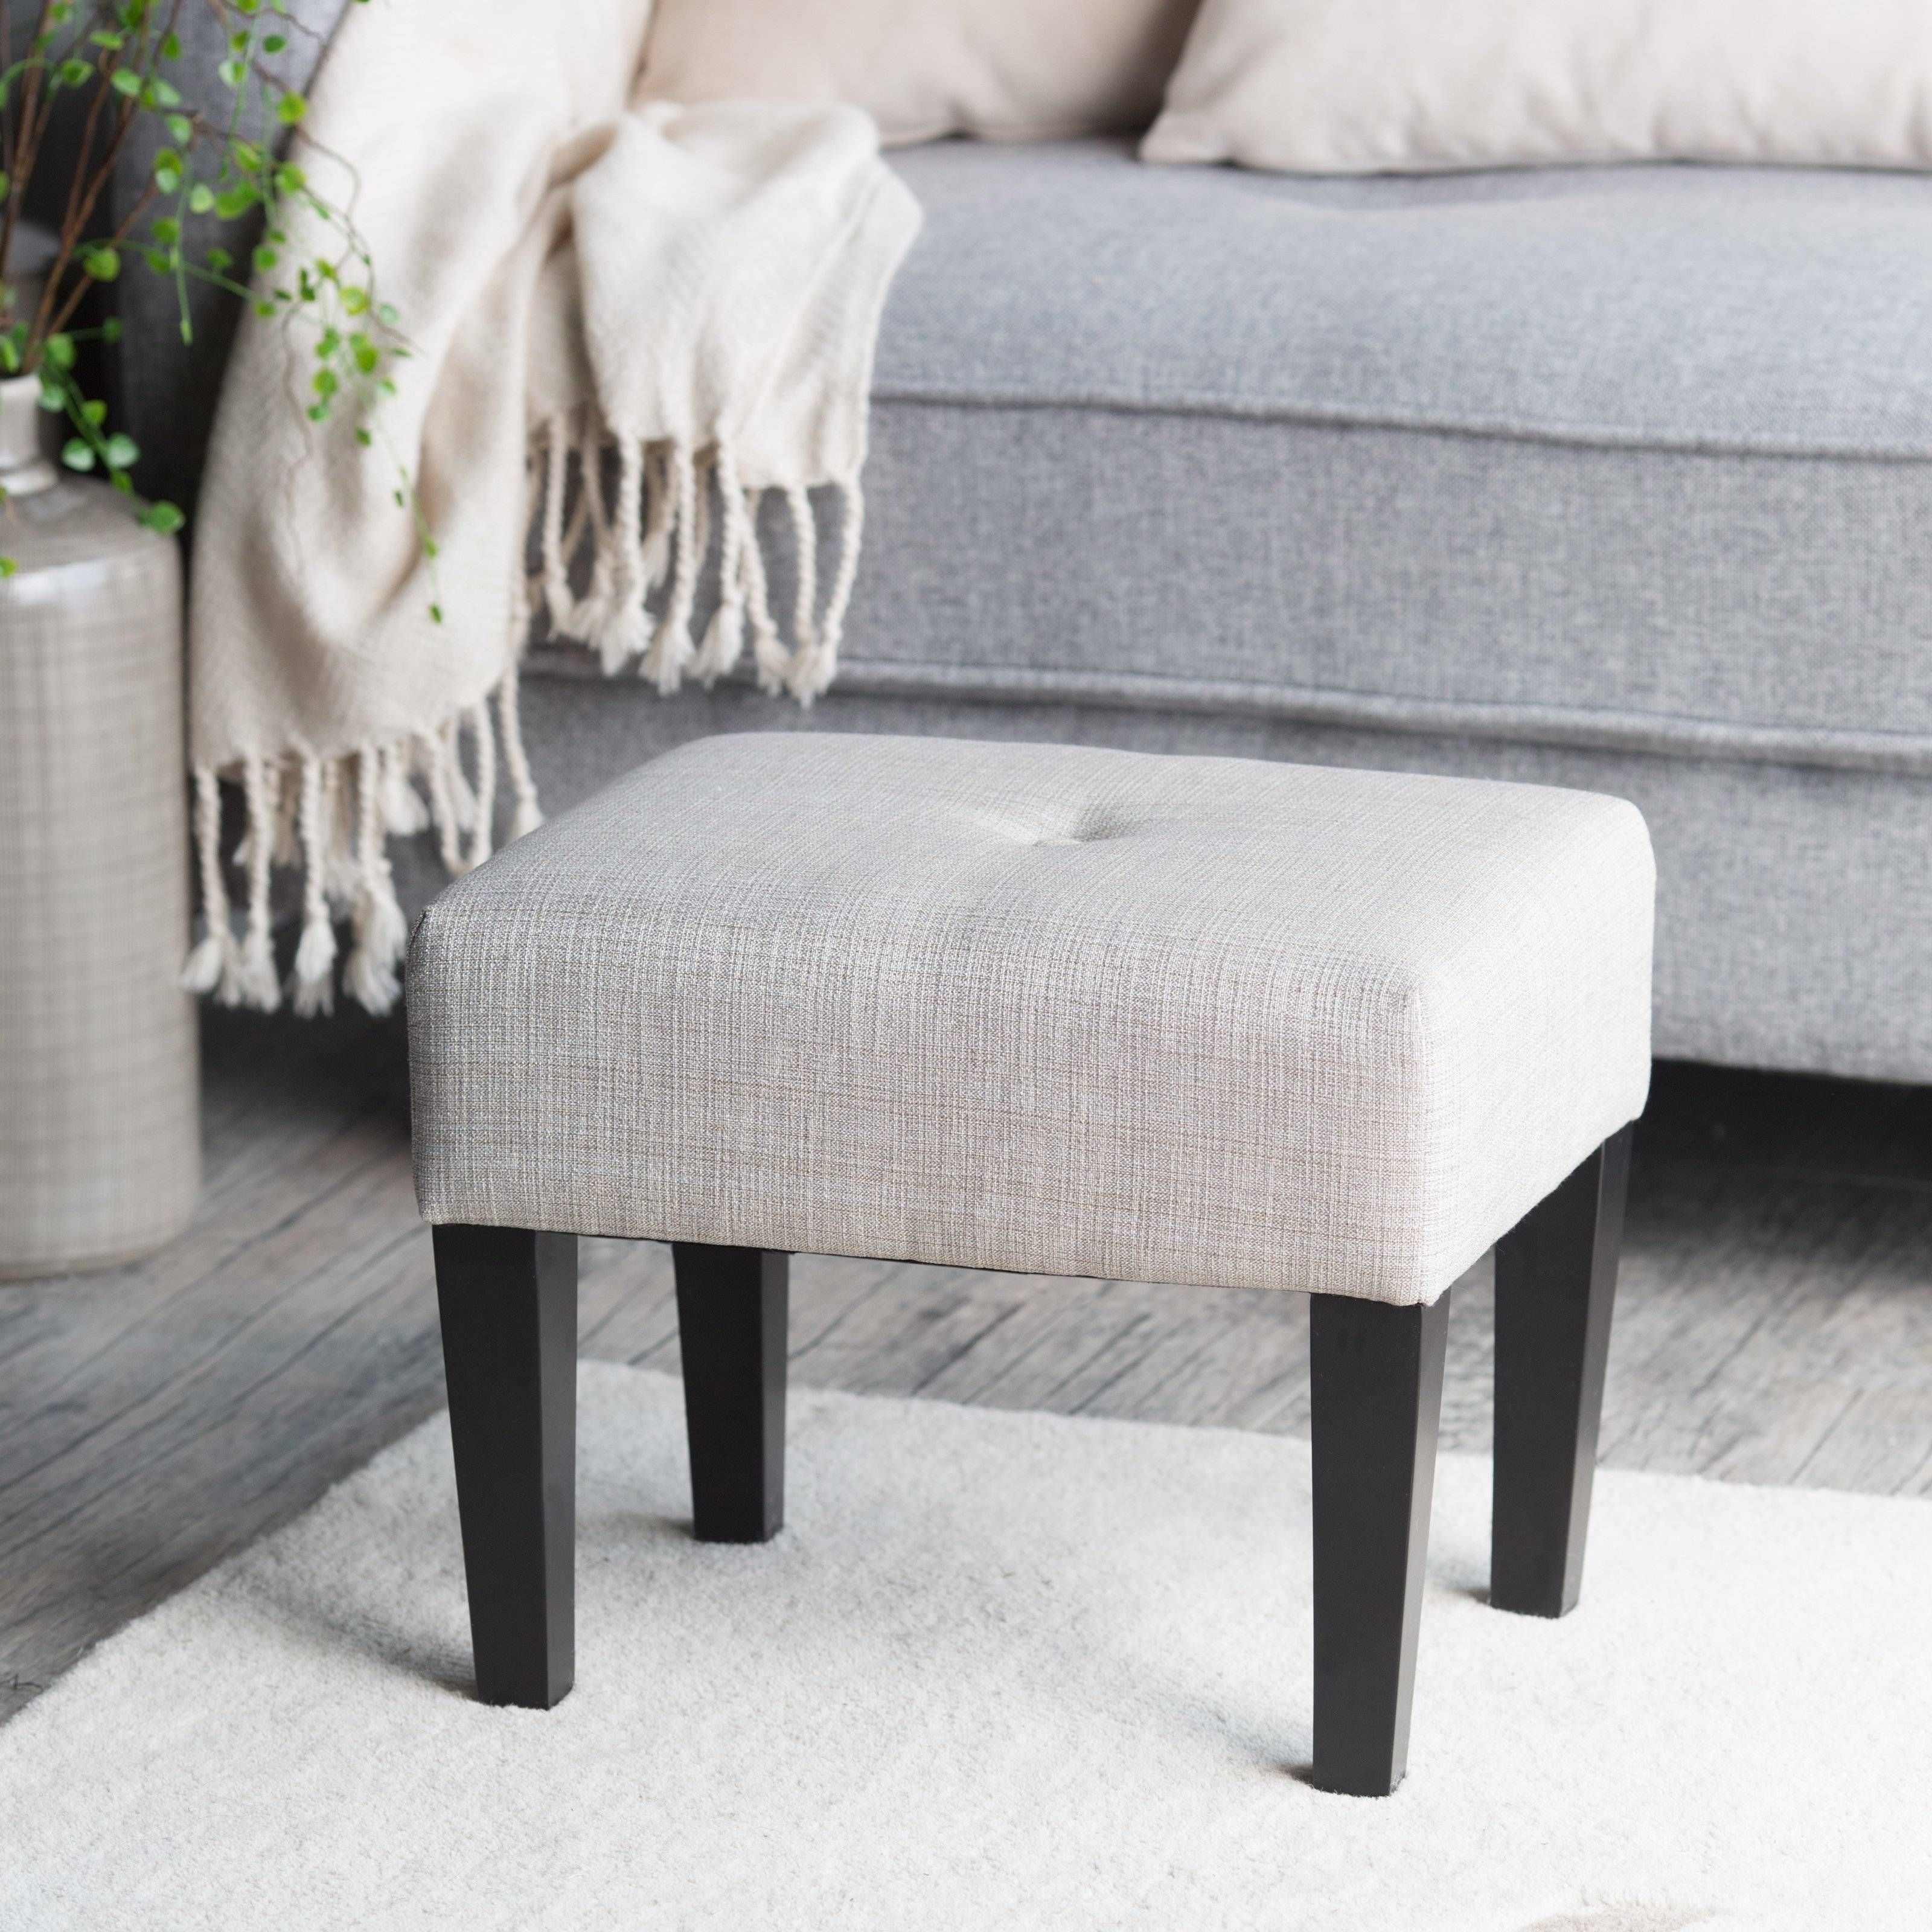 Sofa Small Upholstered Footstool Footstools With Casters Uk White For Upholstered Footstools (View 22 of 30)